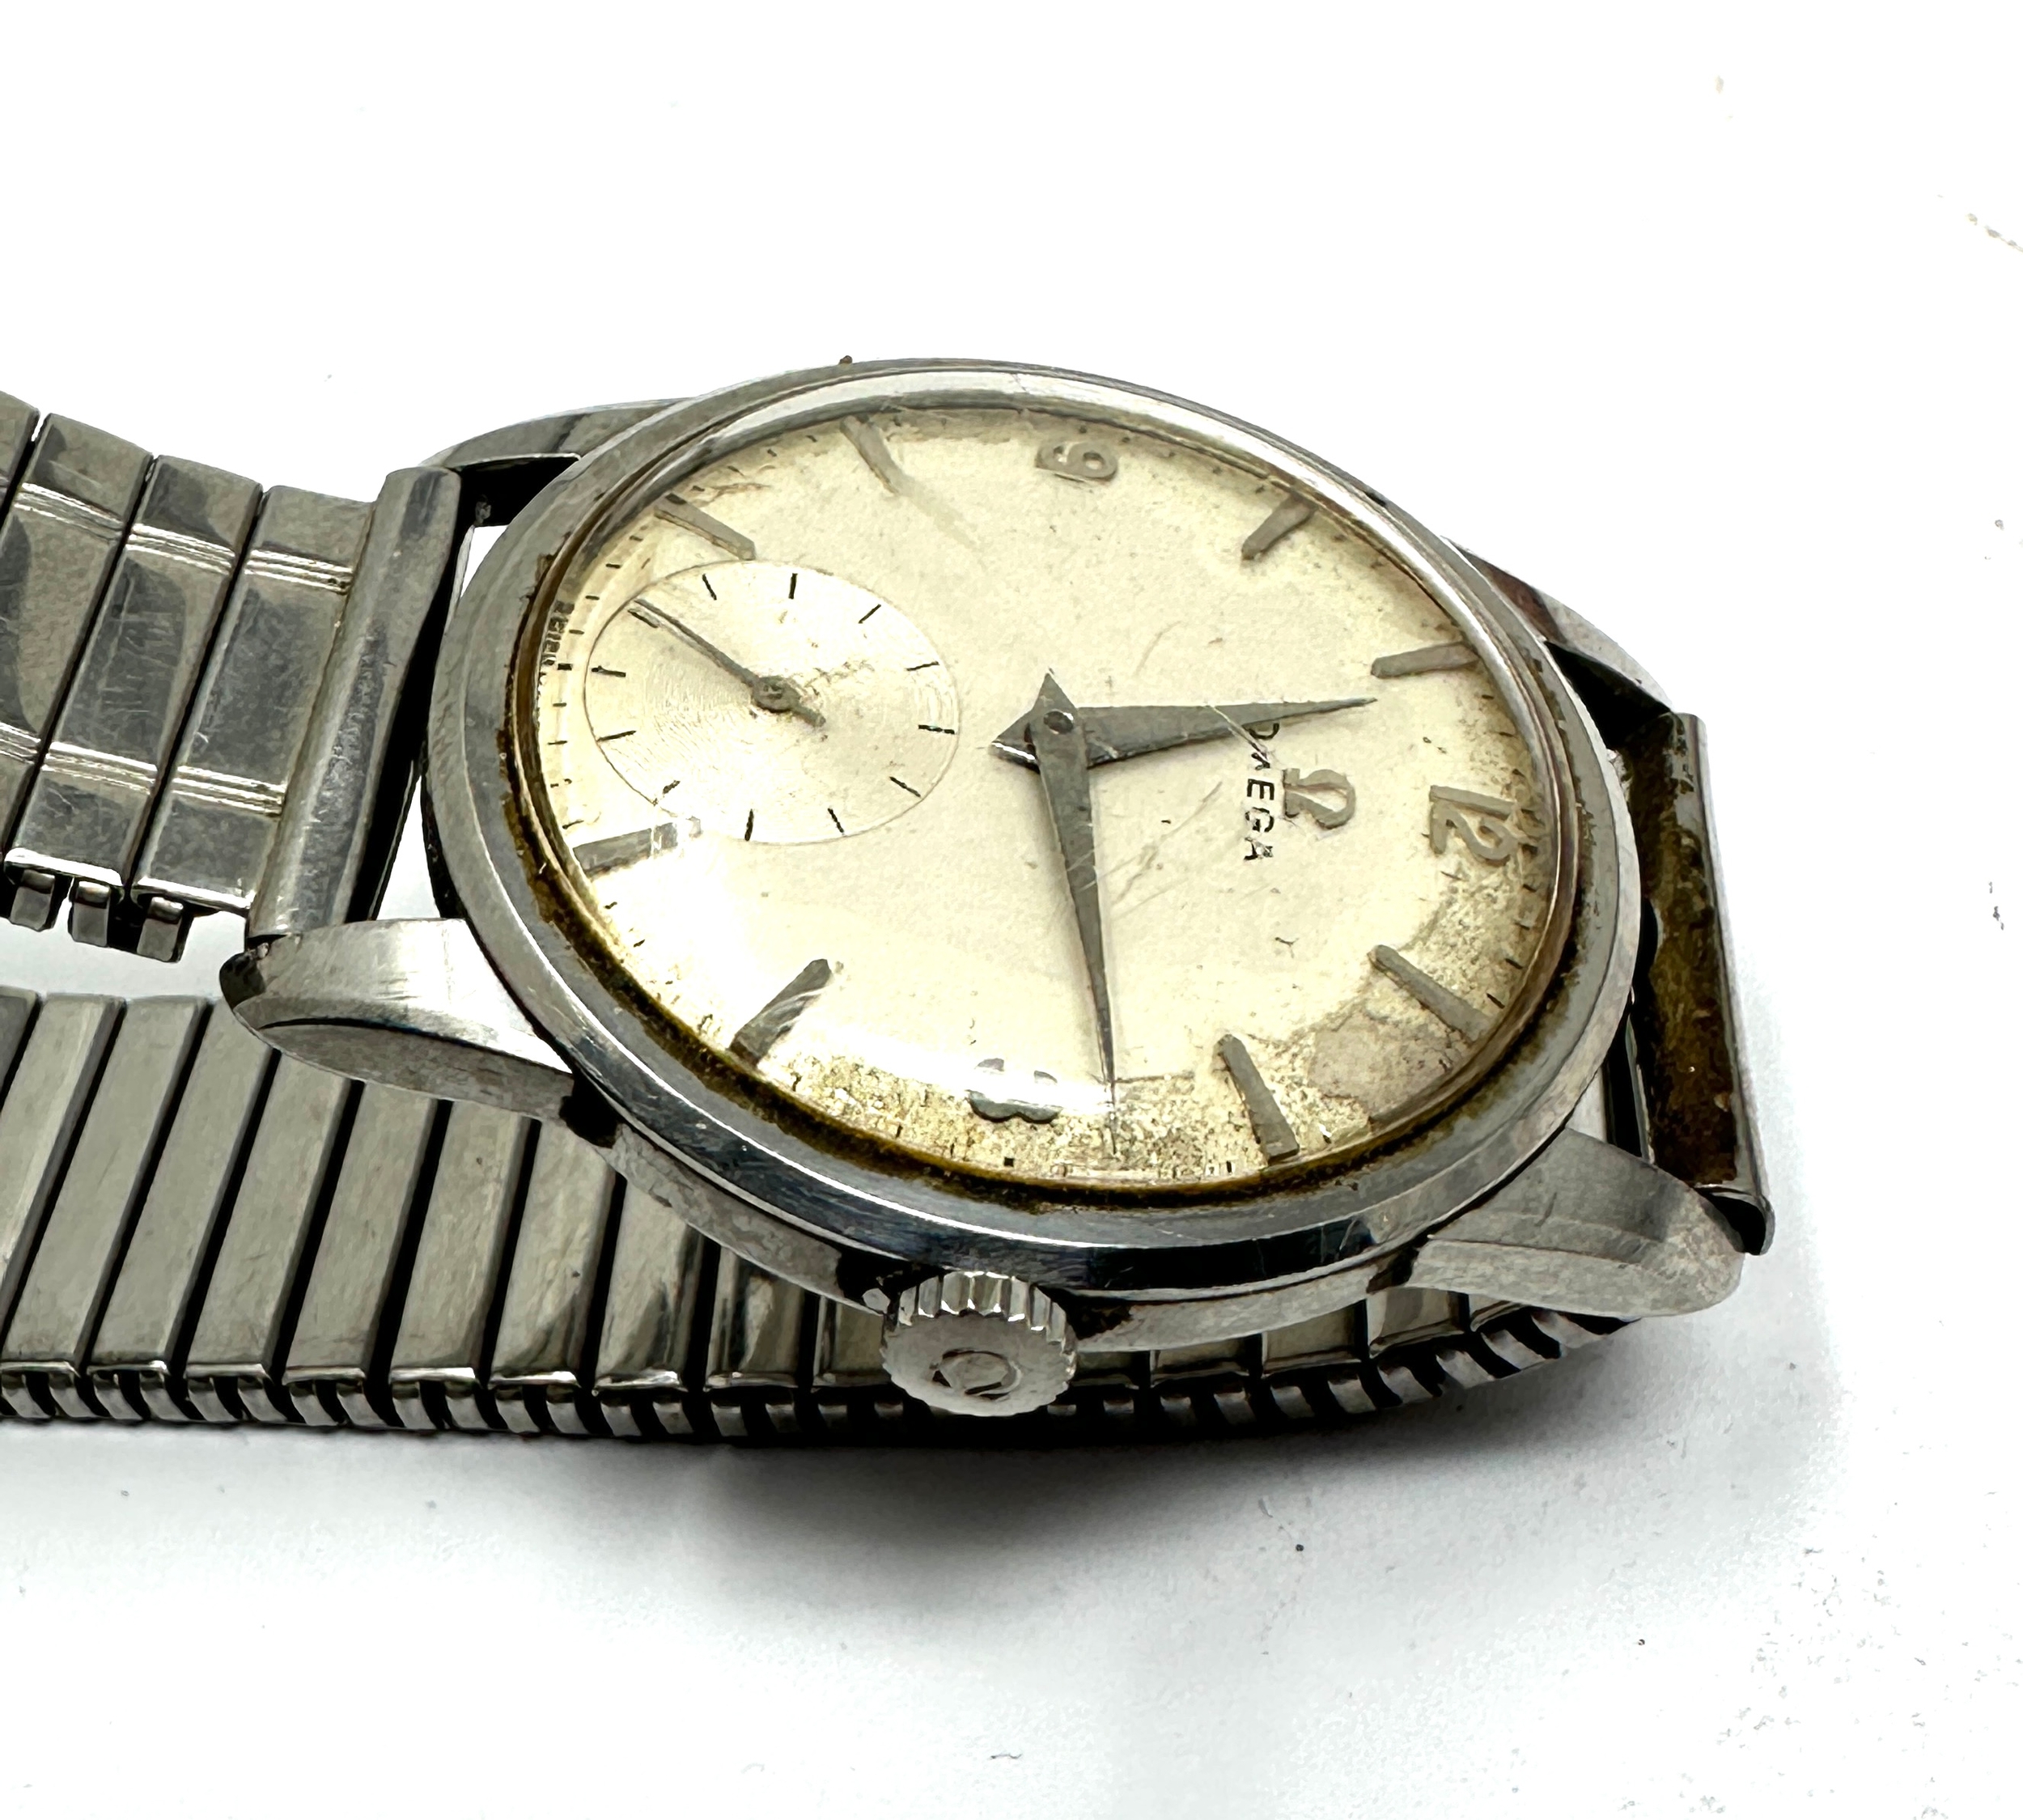 Vintage Gents Omega wrist watch the watch is ticking - Image 2 of 3